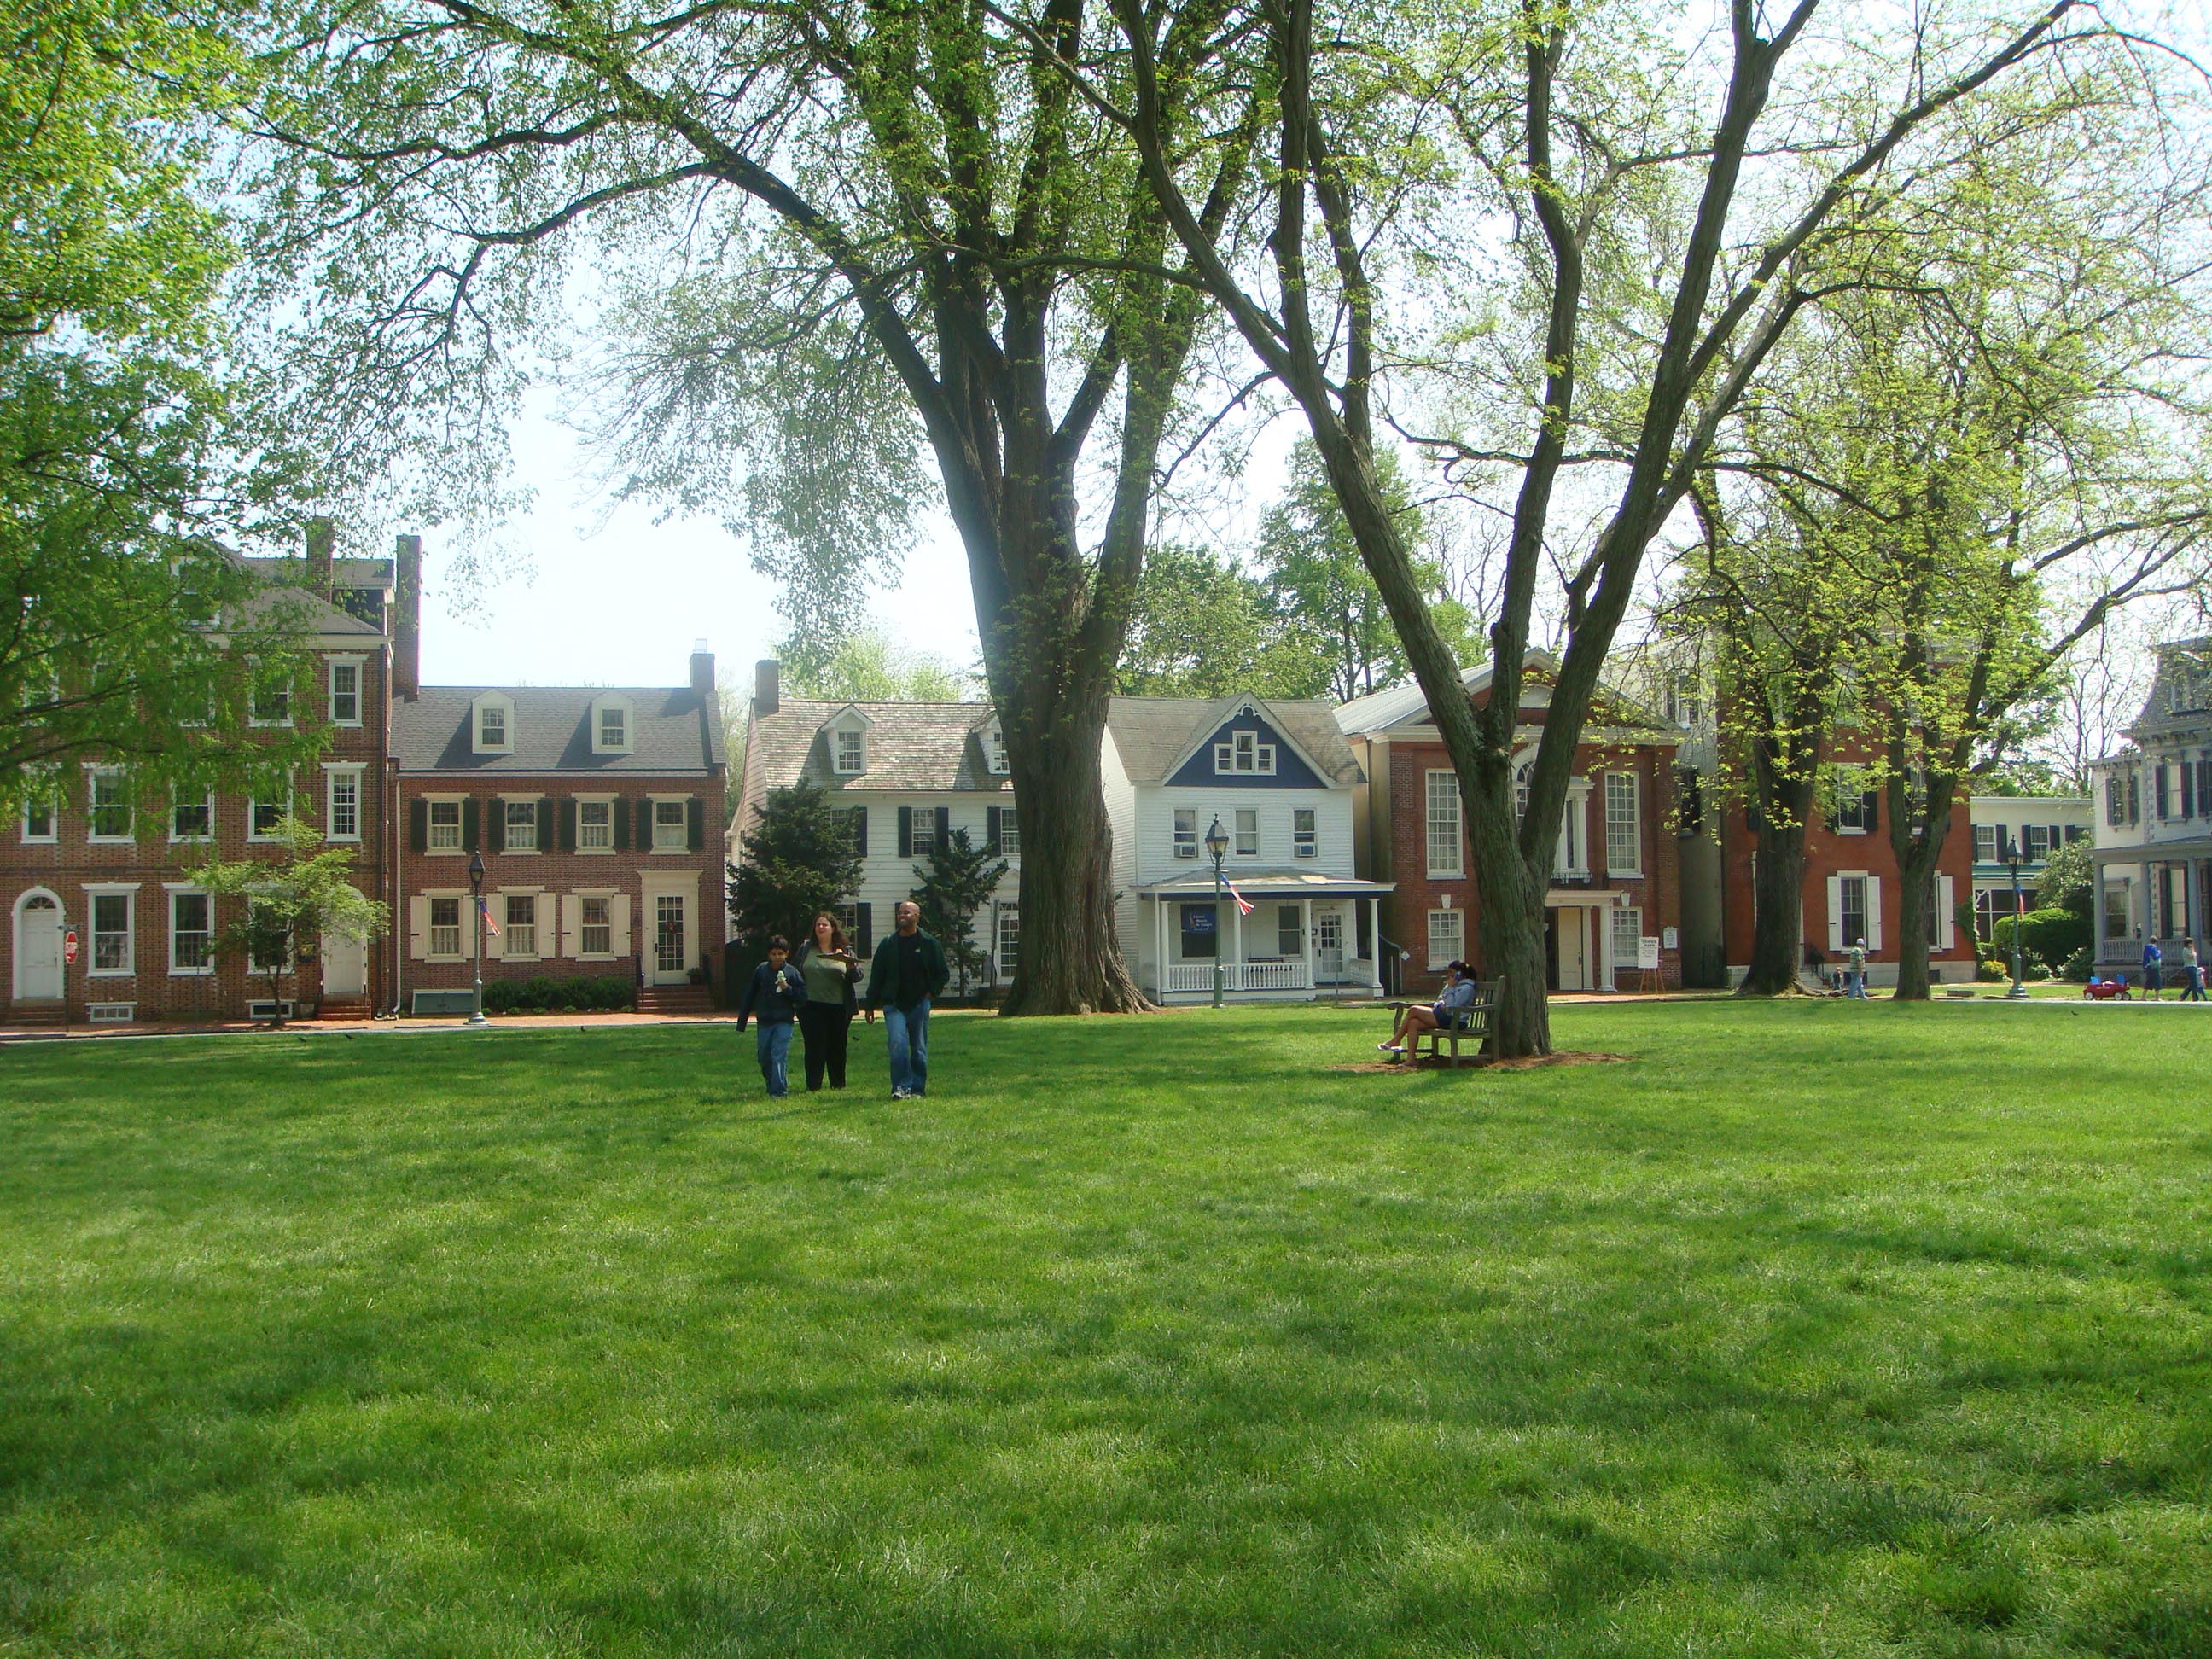 The Dover Green, a National Register Historic District, is centered on the public square laid out in 1717—the original commercial and residential heart of Dover. It was at the Golden Fleece Tavern on the Green that Delaware became the “First State” to ratify the U.S. Constitution in 1787.